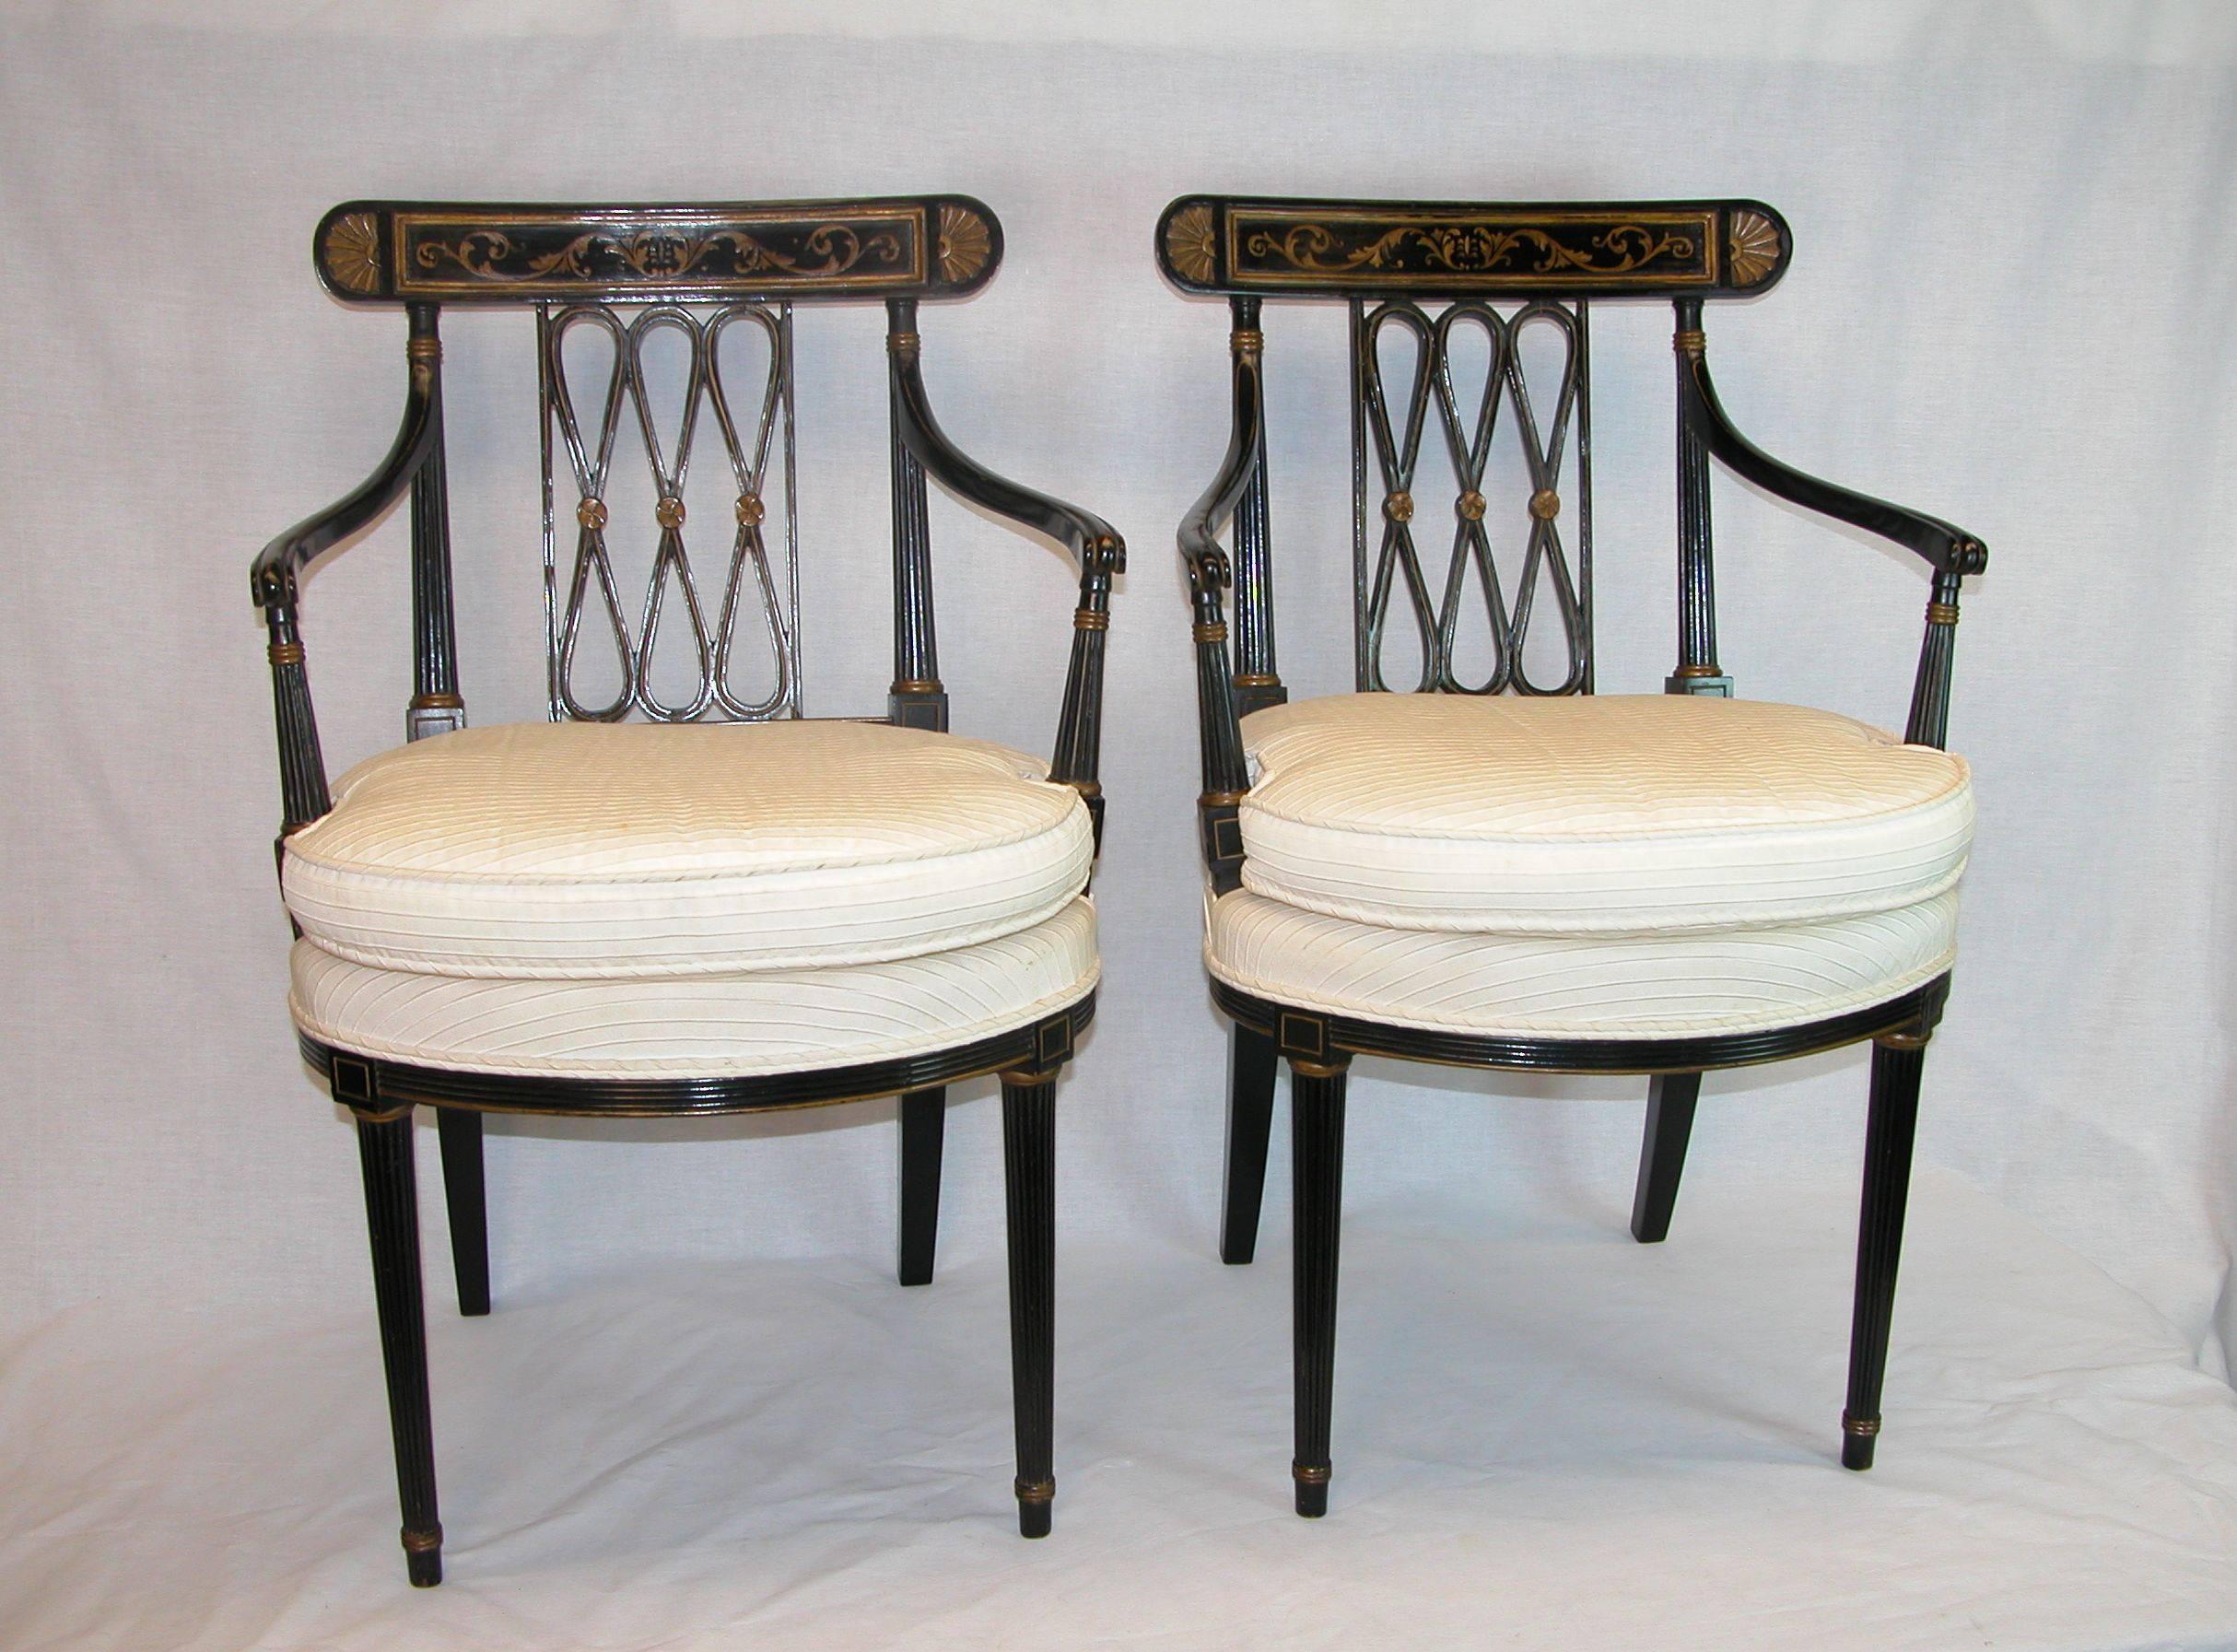 Pair of black lacquered Regency open-armchairs with diamond/ ribbon backs and gold classical decoration. Wonderful narrow carved and curved arms above tapered ribbed supports, the apron is also carved with ribs as well as the legs. Upholstered with